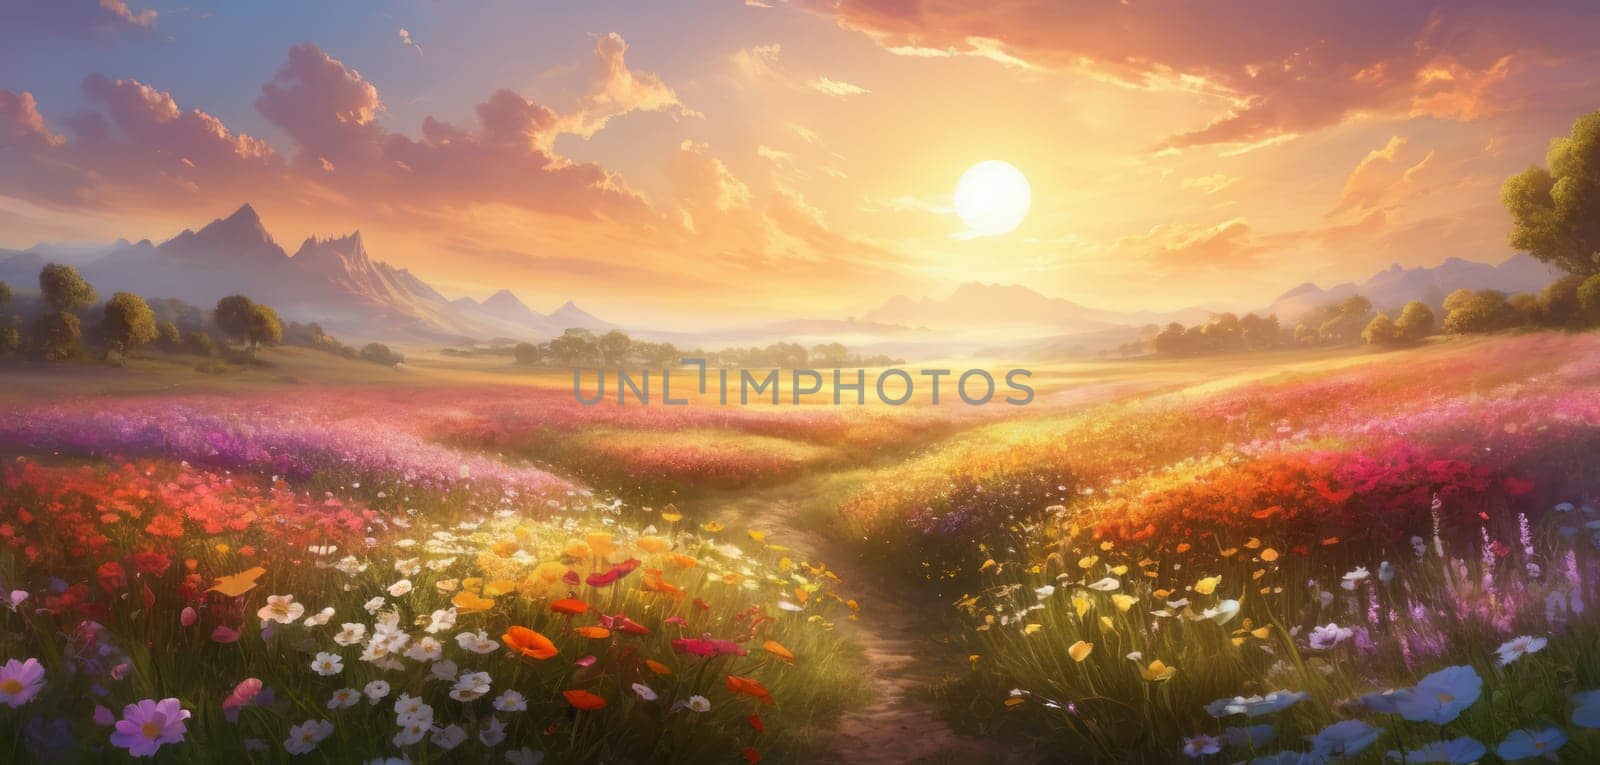 A breathtaking sunrise illuminating a vibrant meadow teeming with colorful blossoms. The serene landscape exudes warmth and tranquility as light rays dance over the flowers. A picturesque scene capturing nature s awakening